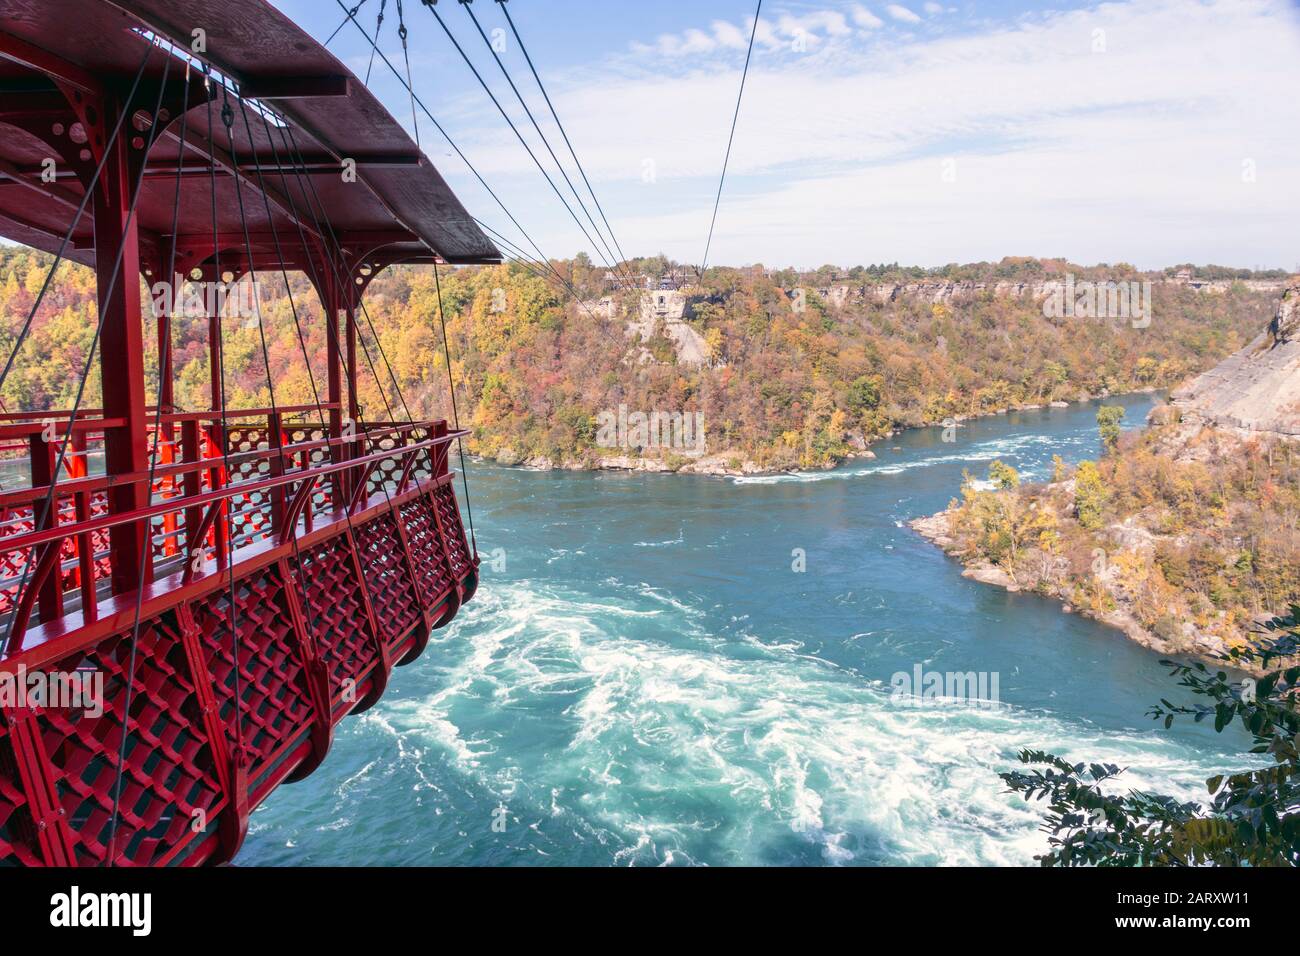 The Niagara Gorge and River are seen from near the Whirlpool Aero Car, a popular attraction in Niagara Falls, Canada. Stock Photo